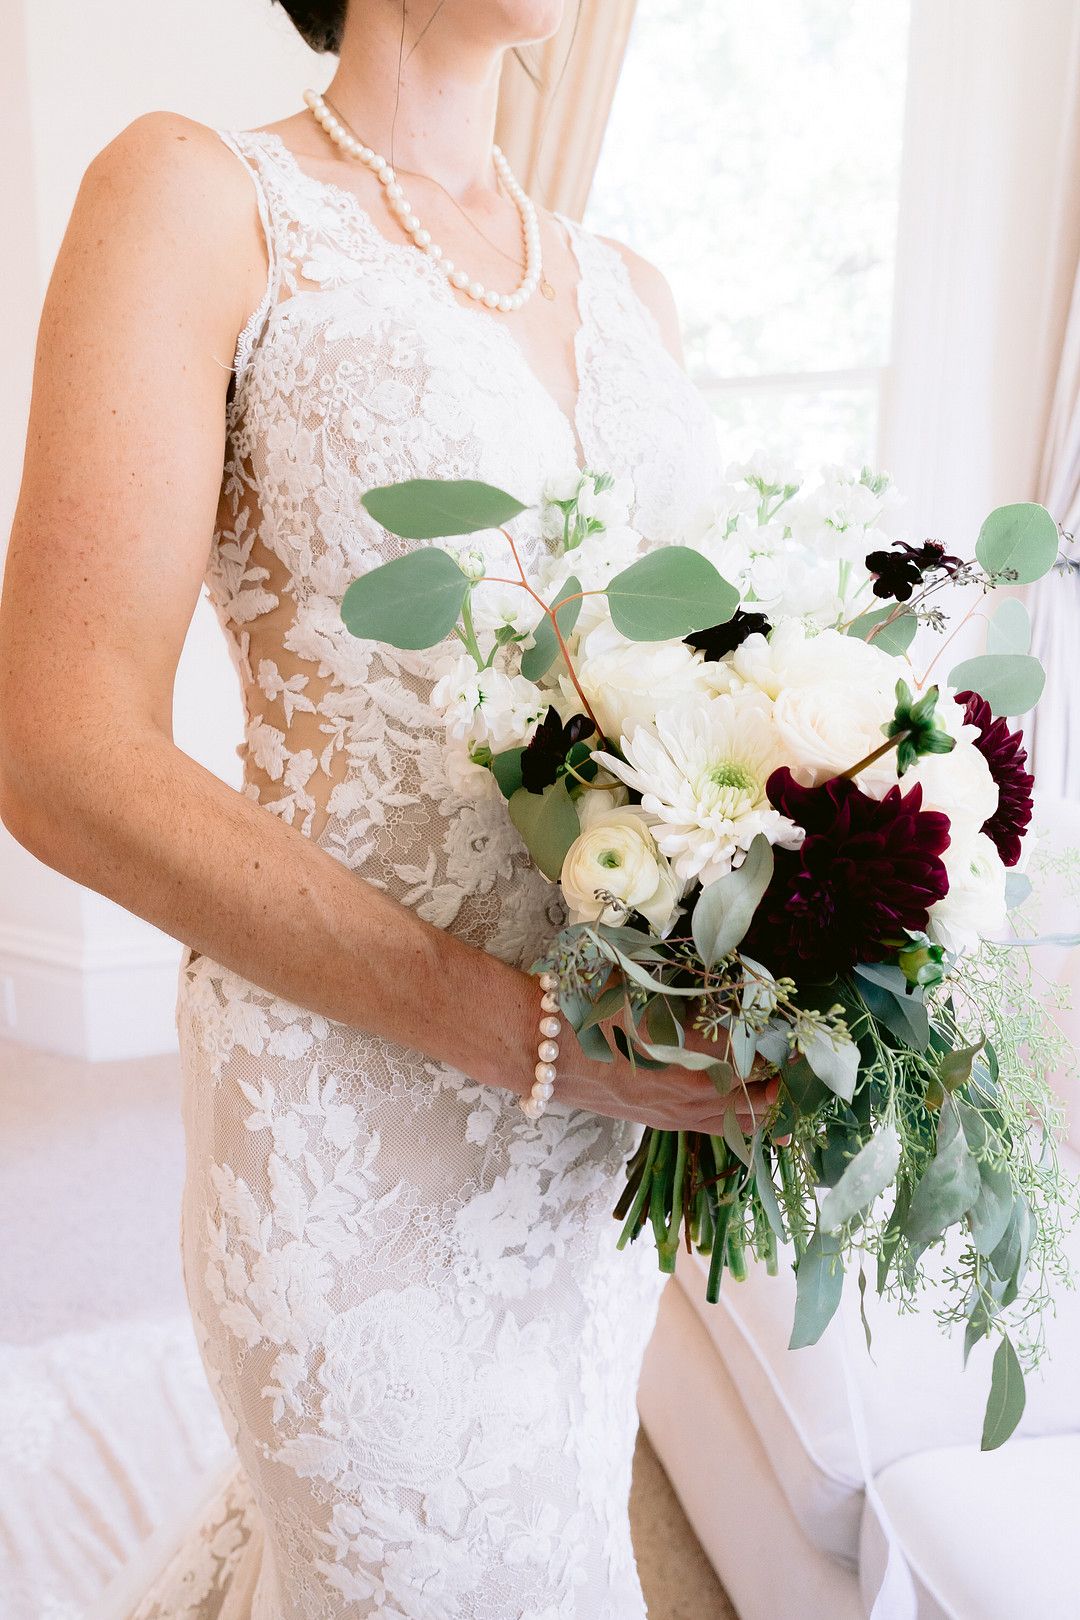 upclose picture of bride's flowers and dress